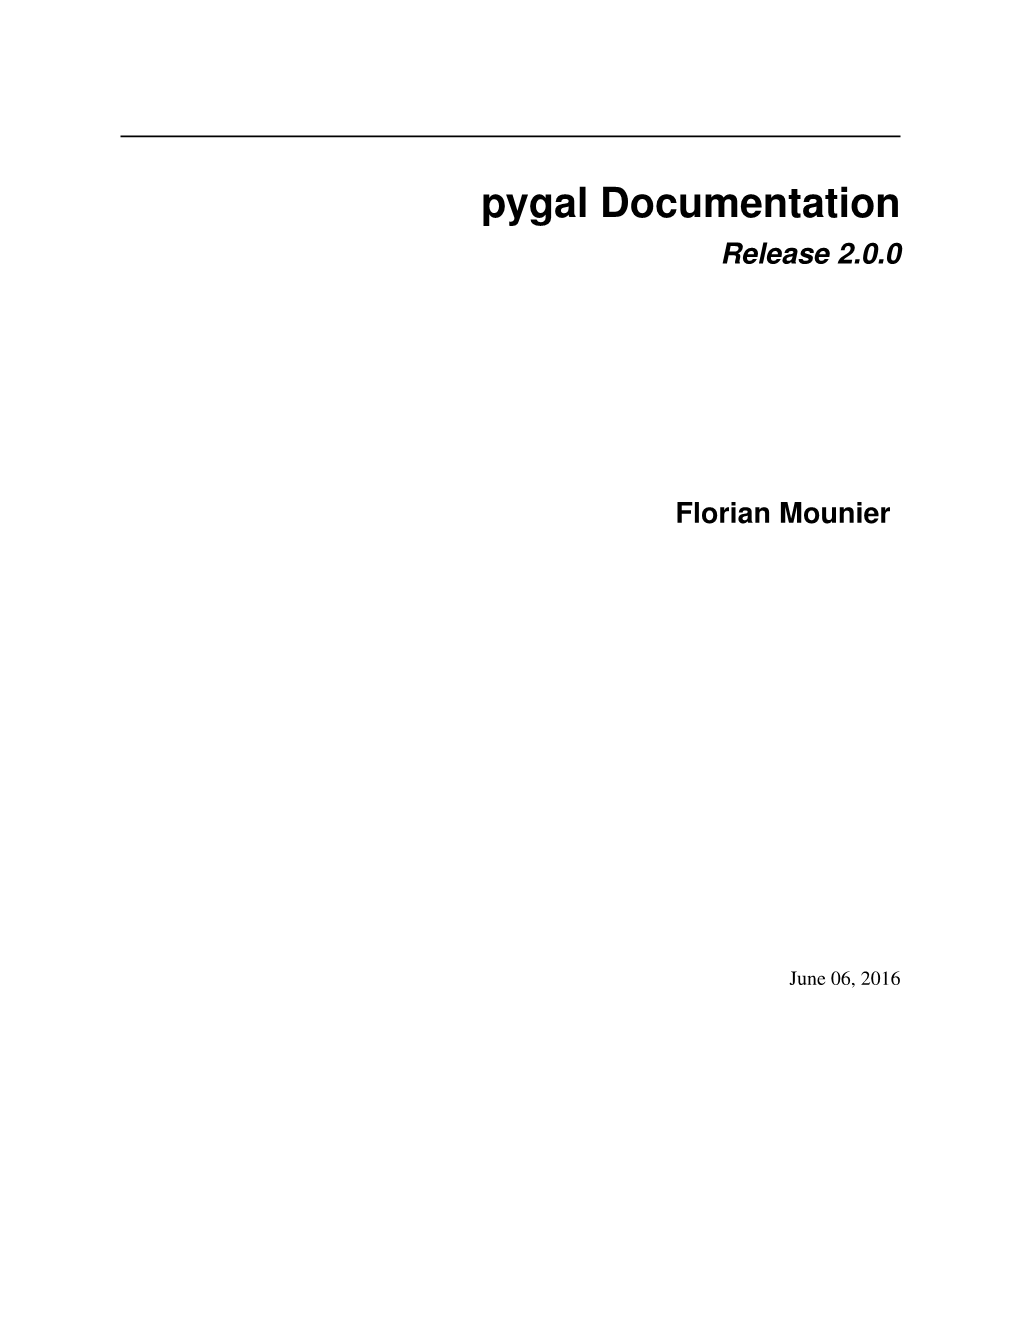 Pygal Documentation Release 2.0.0